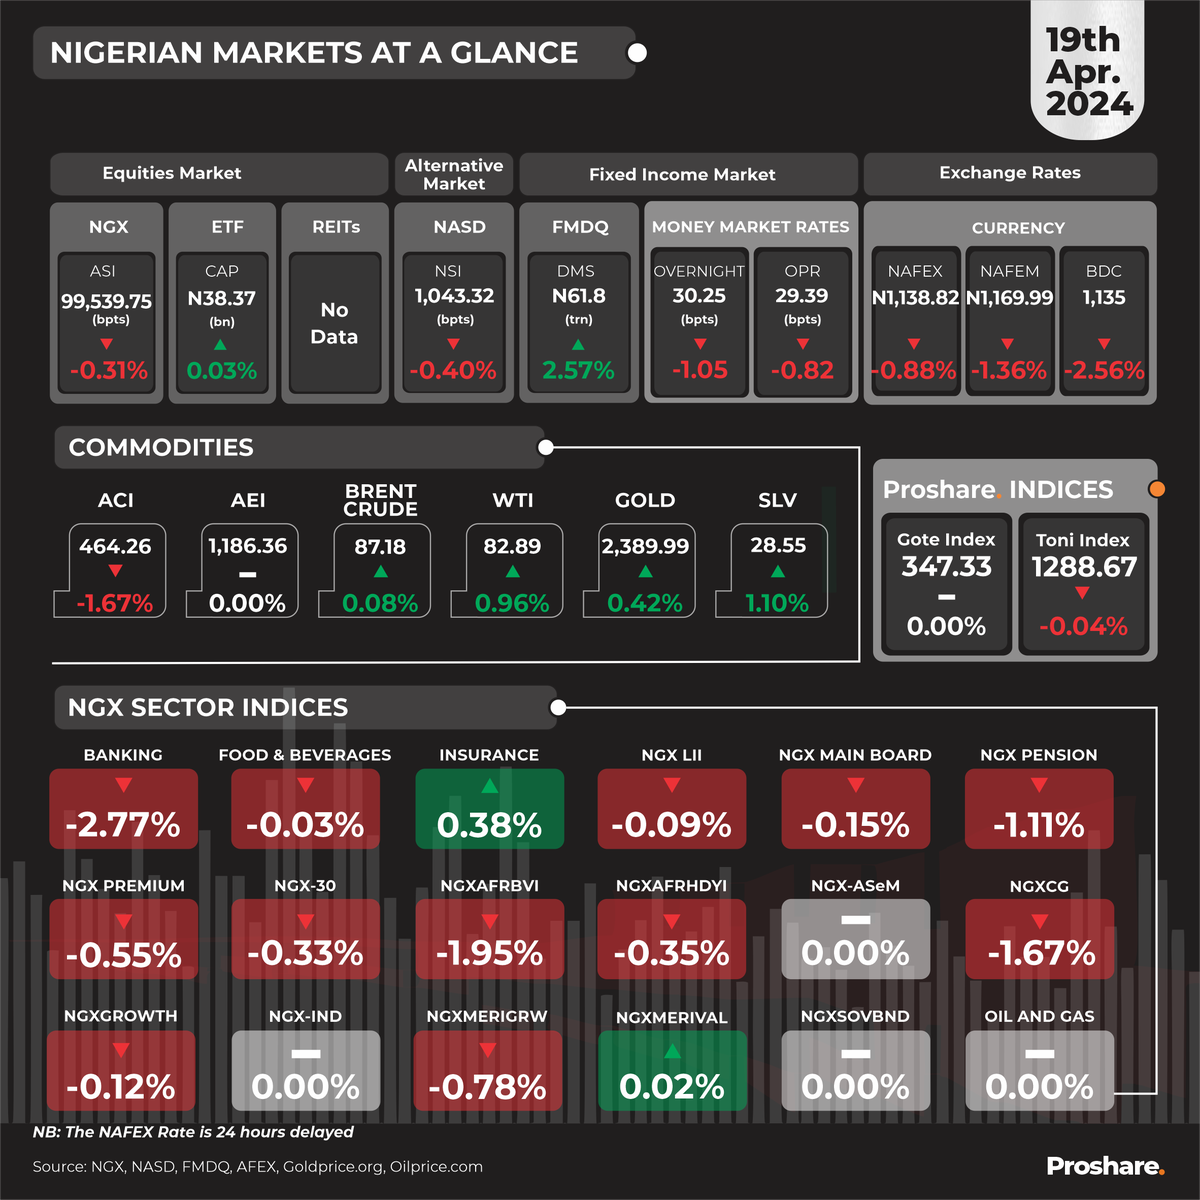 The Nigerian Markets at a Glance 19th April 2024

Visit proshare.co/articles/list?… for more market information.

#AskProshare
#marketupdates